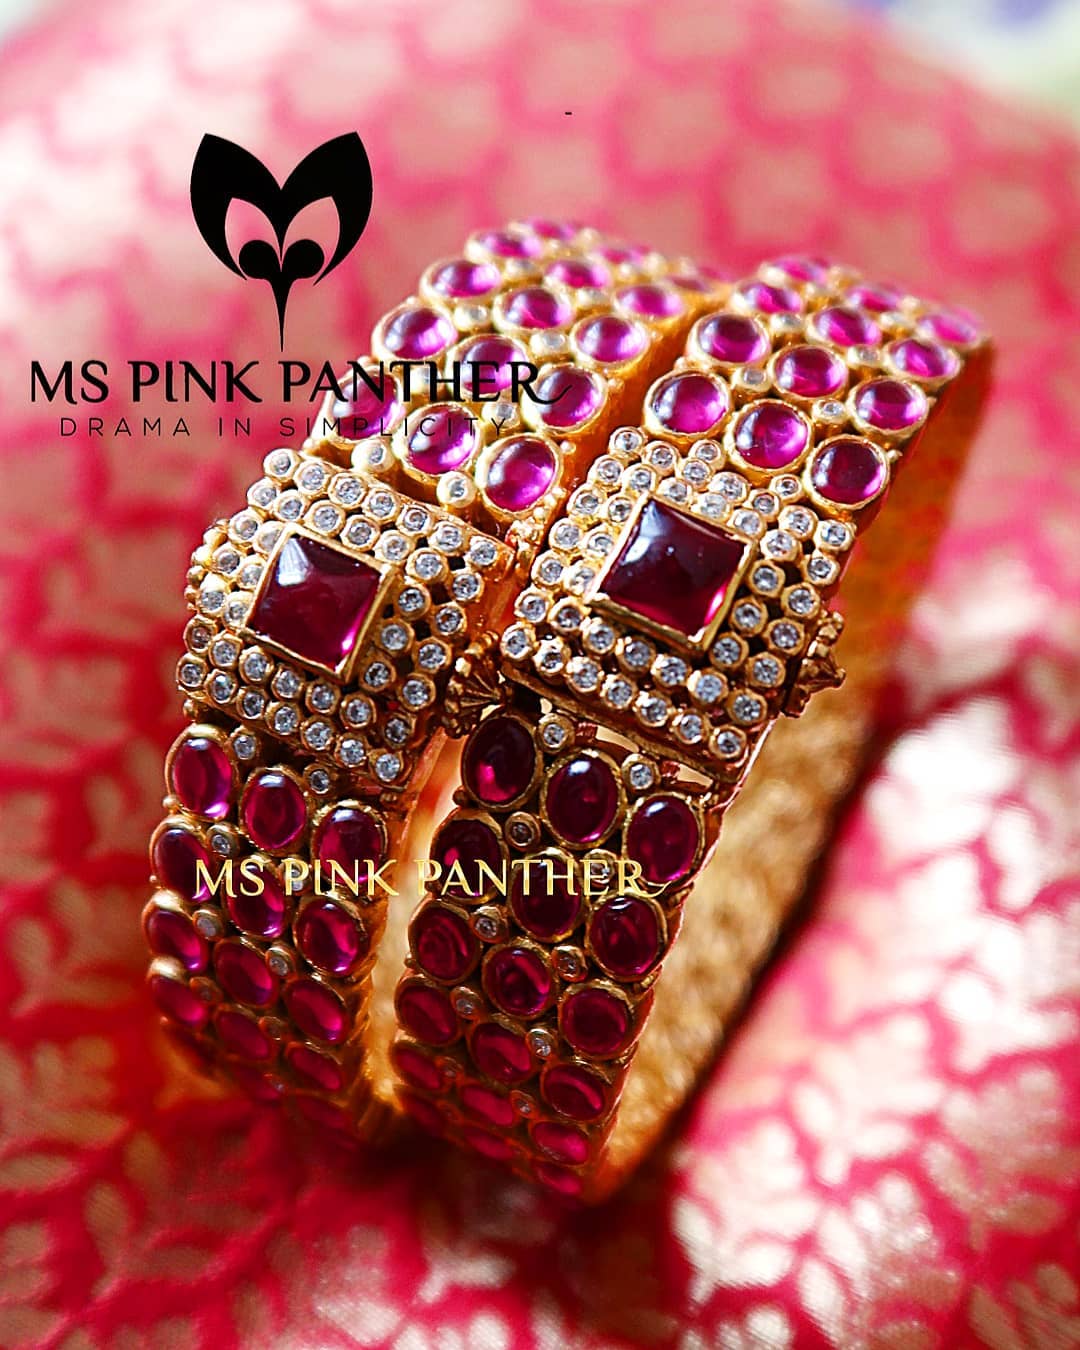 Adorable Silver Bangle From Ms Pink Panthers